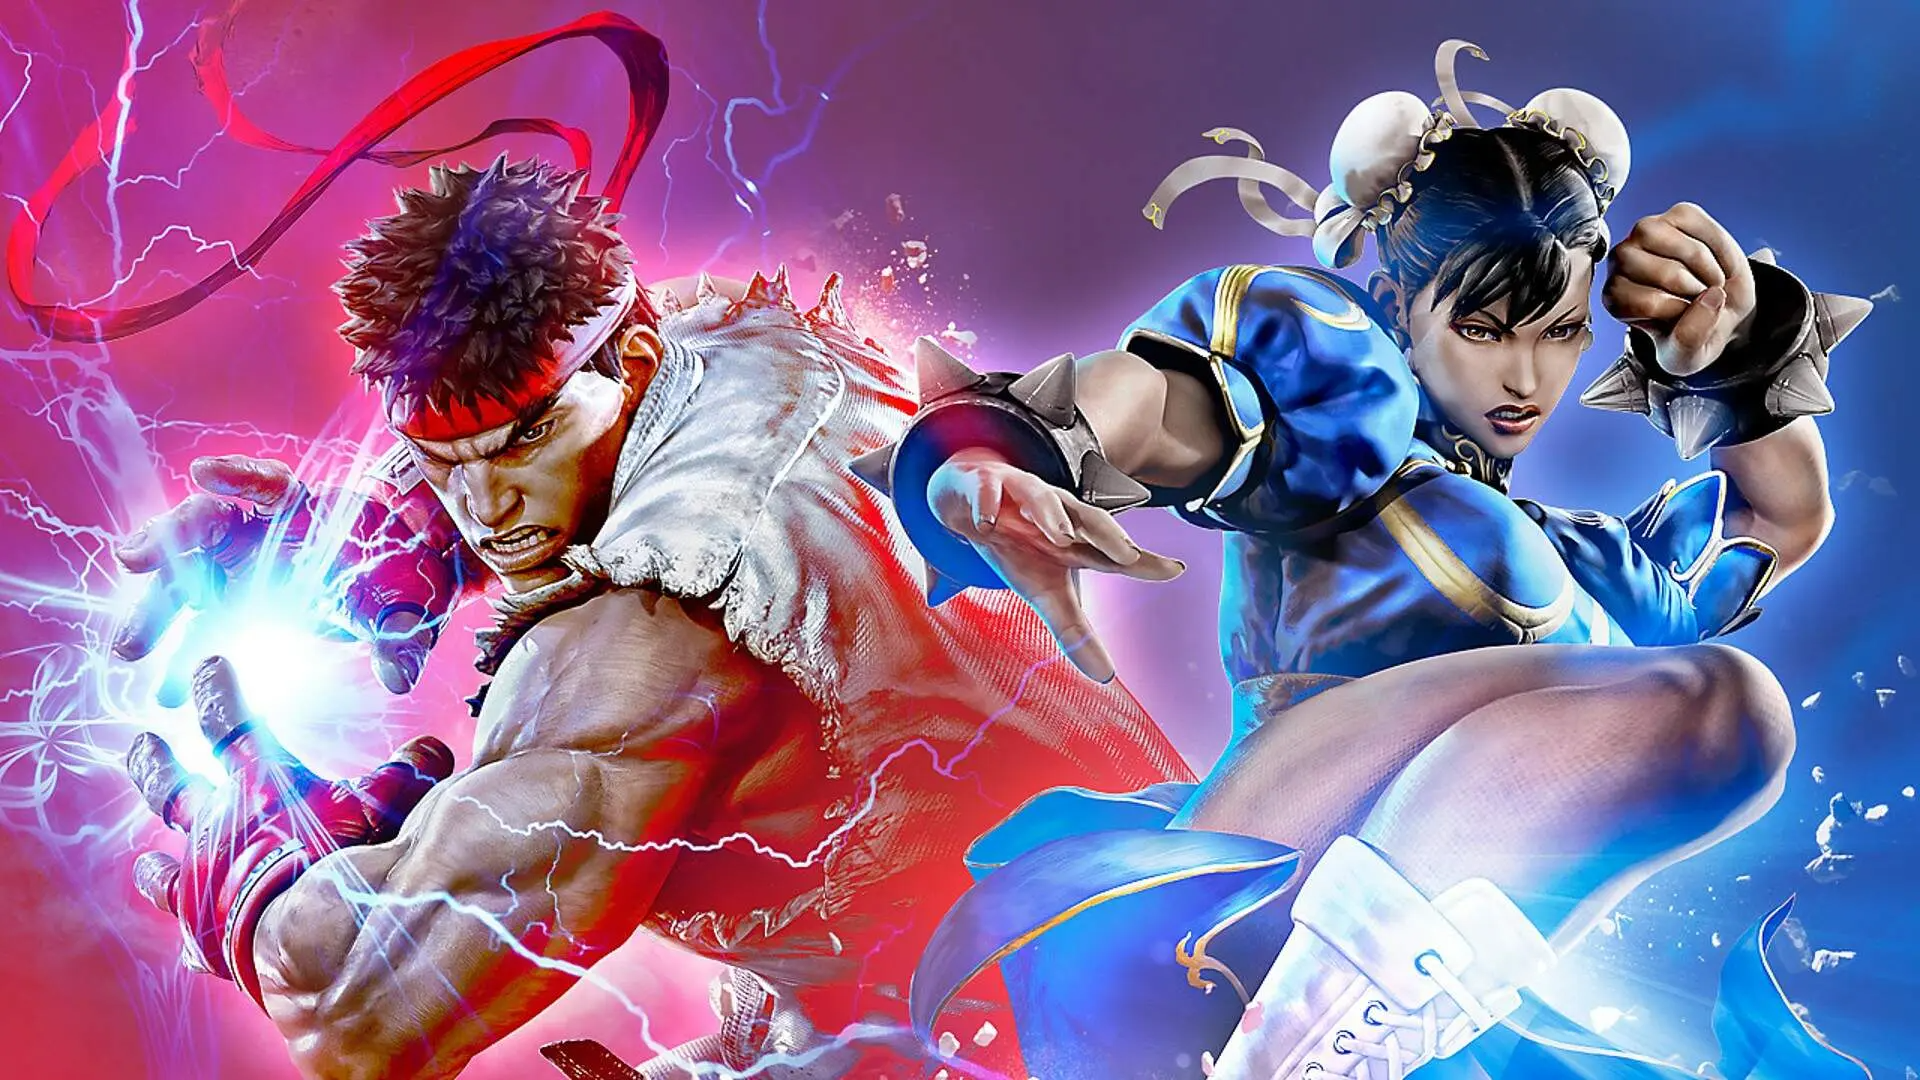 Street Fighter 6 received an age rating in Korea